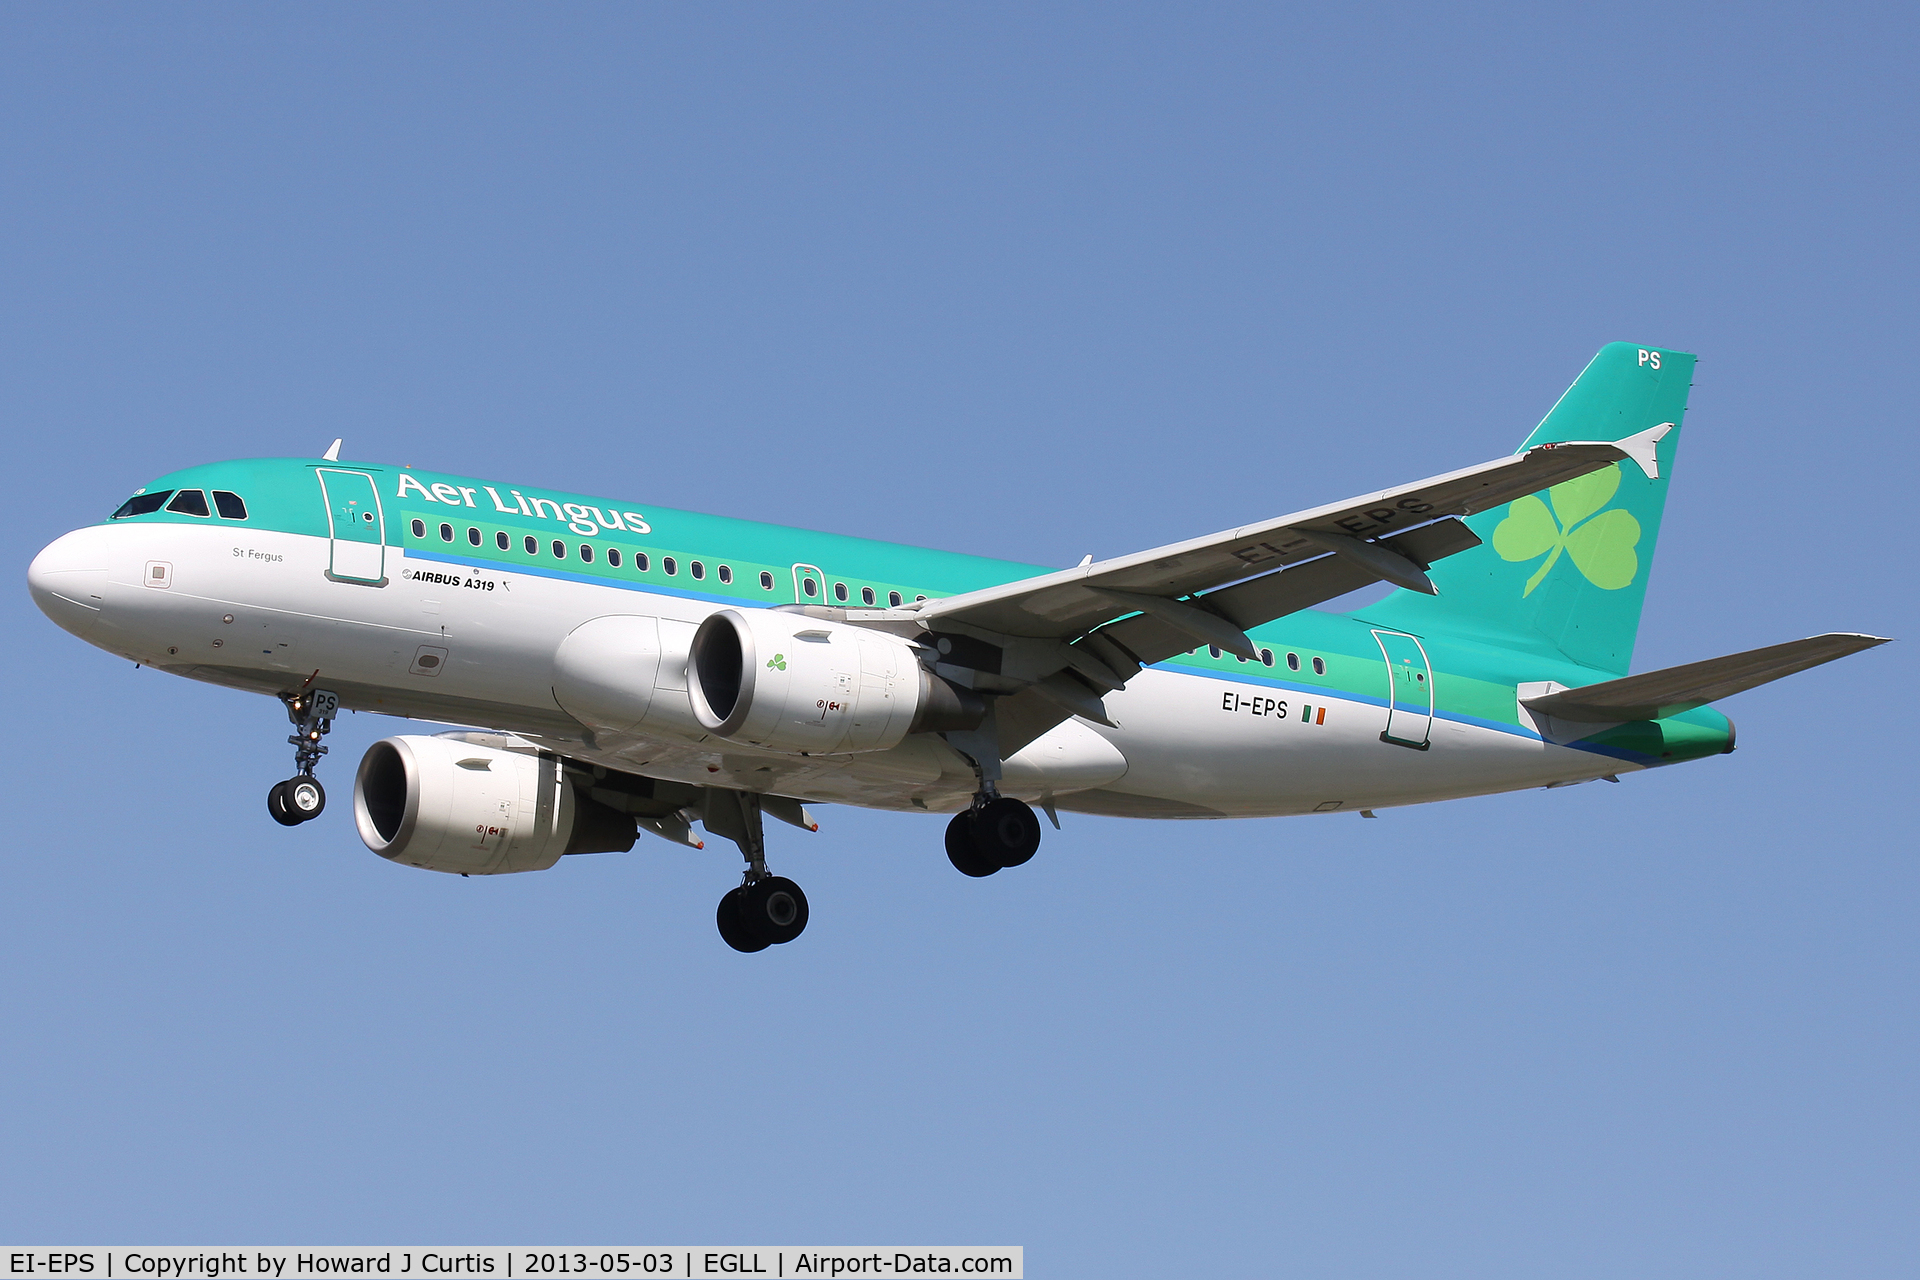 EI-EPS, 2008 Airbus A319-111 C/N 3377, Aer Lingus, on finals for runway 27L.